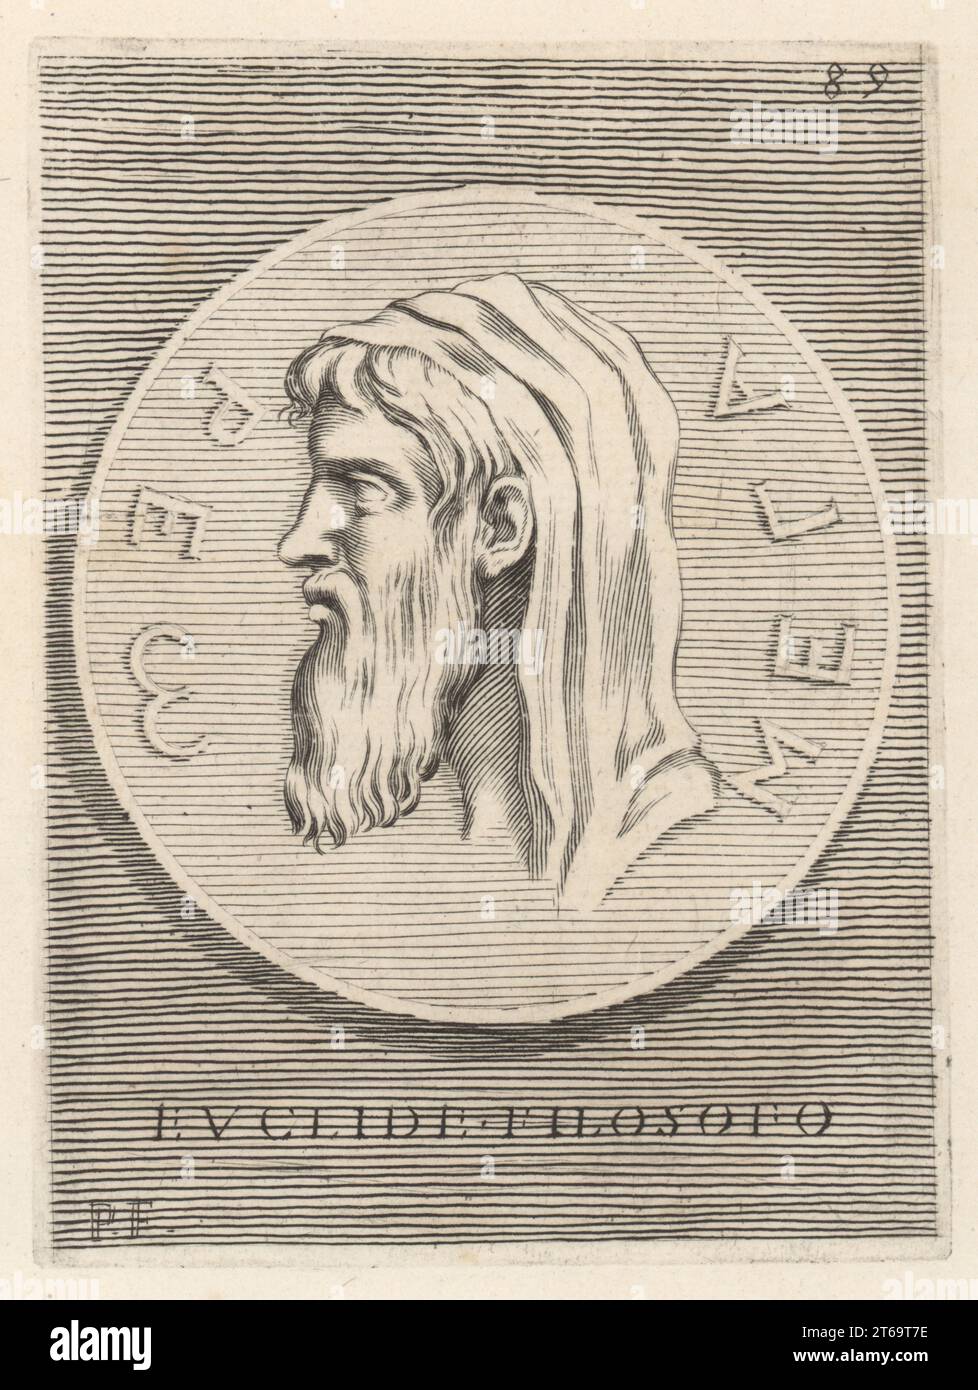 Euclid of Megara, Greek socratic philosopher and founder of the Megarian school, c.435-365 BC. Depicted with beard and hood from a bronze medal in the collection of Cardinal Camillo Massimo. Euclide Filosofo Megarese. Copperplate engraving by Etienne Picart after Giovanni Angelo Canini from Iconografia, cioe disegni d'imagini de famosissimi monarchi, regi, filososi, poeti ed oratori dell' Antichita, Drawings of images of famous monarchs, kings, philosophers, poets and orators of Antiquity, Ignatio deLazari, Rome, 1699. Stock Photo